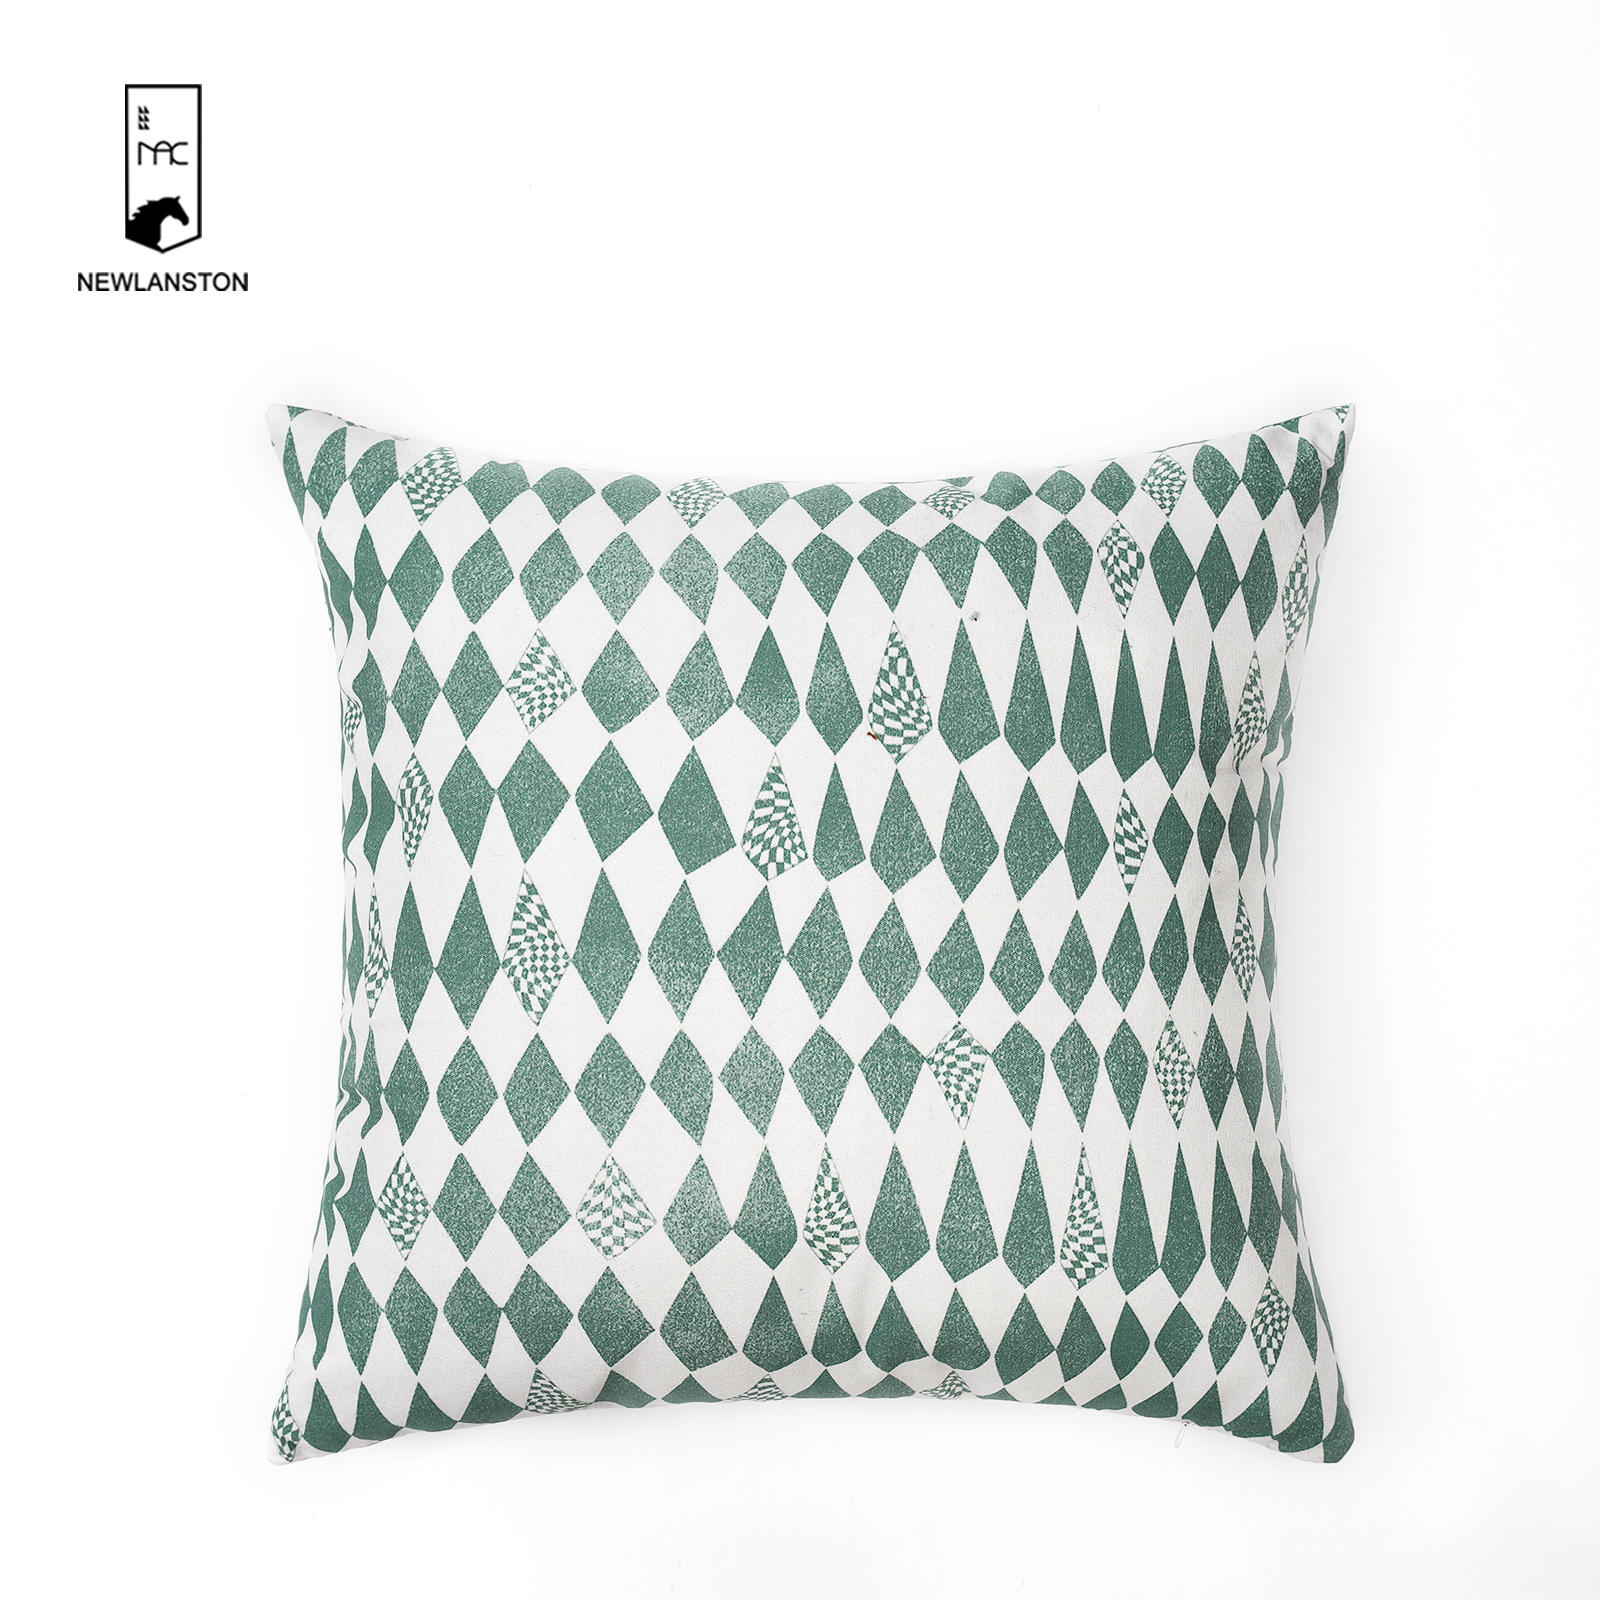  45x45 Digital printed recycled cotton Geometric style Cushion cover